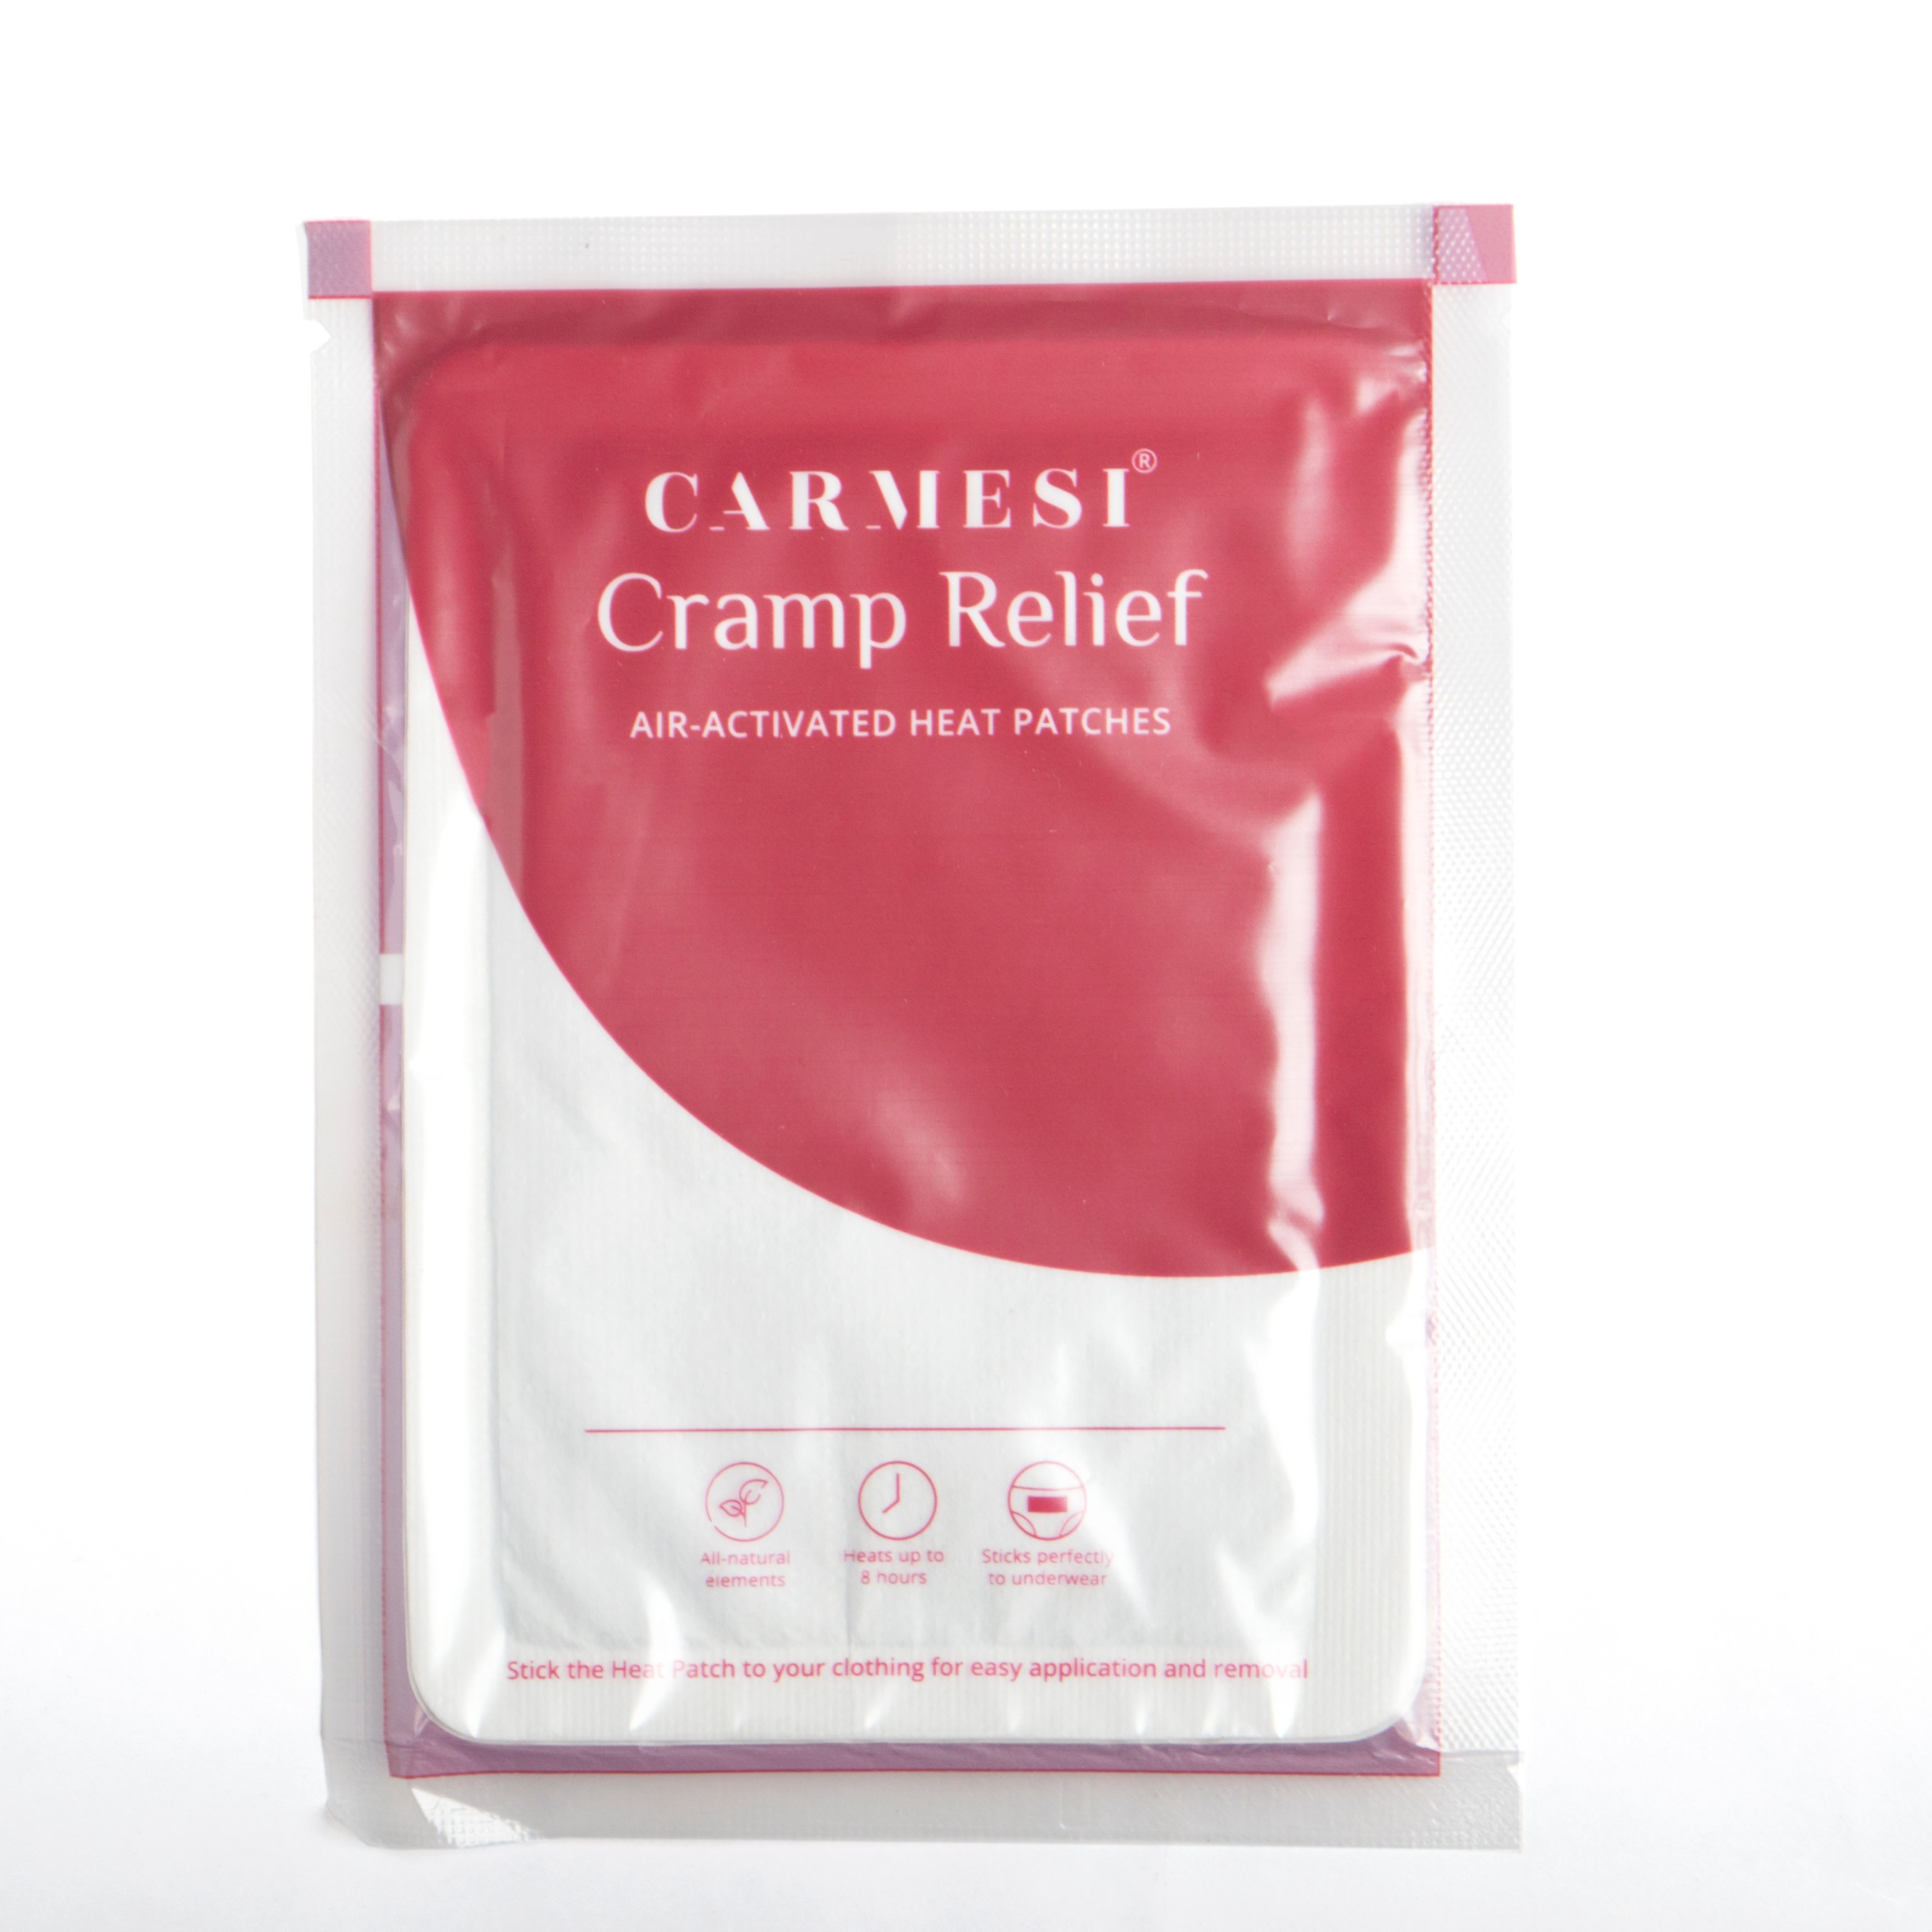 Carmesi reiterates its commitment towards women with the launch of its first ever  Cramp Relief Heat Patch to end Period Pain